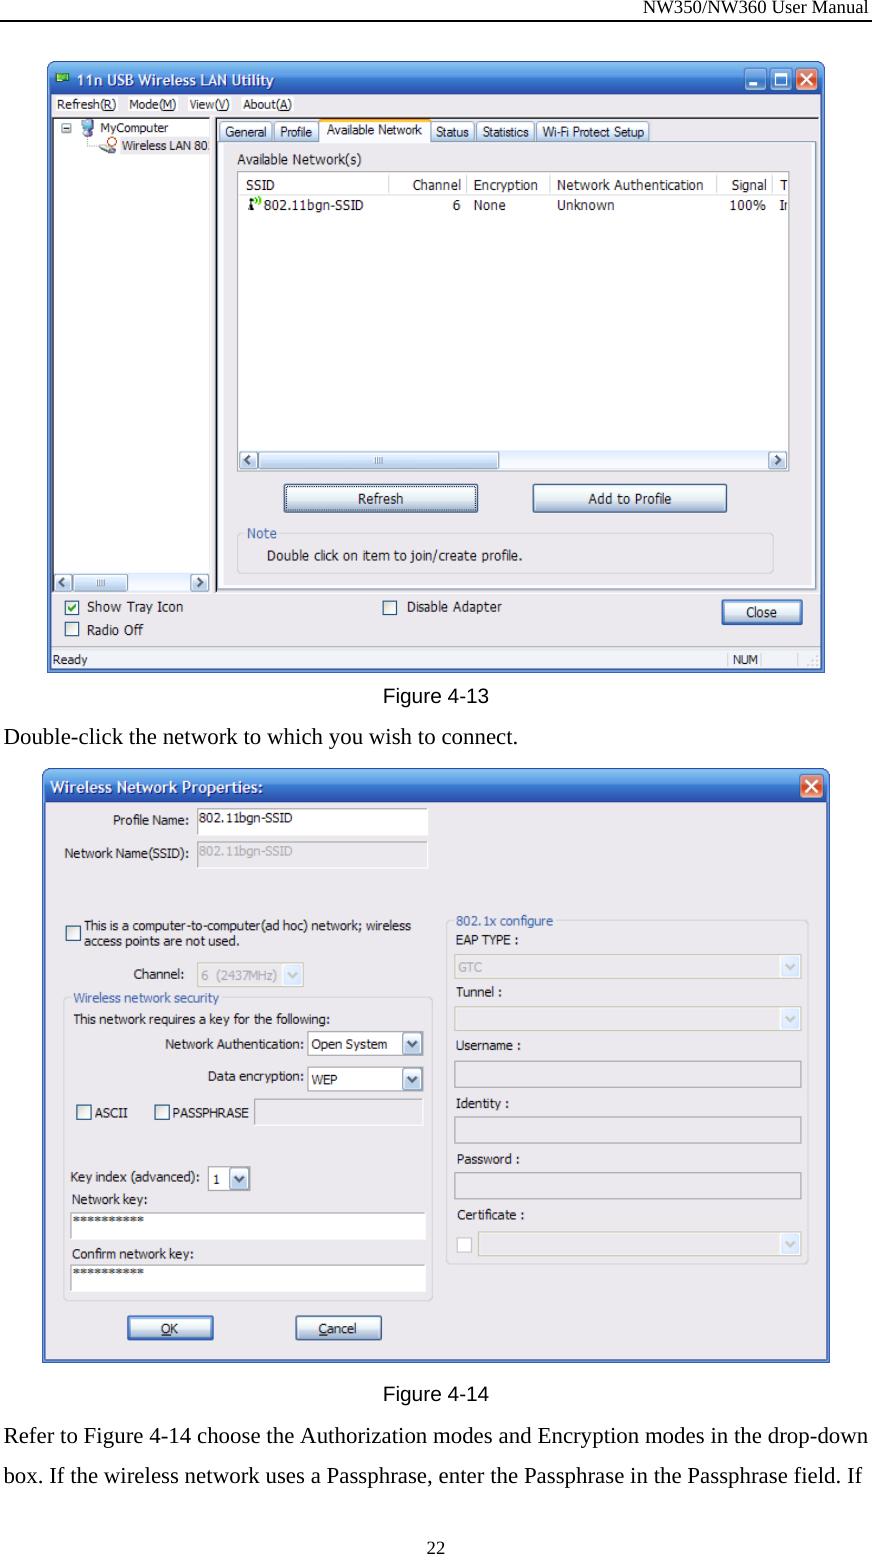 NW350/NW360 User Manual  22 Figure  4-13 Double-click the network to which you wish to connect.    Figure  4-14 Refer to Figure  4-14 choose the Authorization modes and Encryption modes in the drop-down box. If the wireless network uses a Passphrase, enter the Passphrase in the Passphrase field. If 